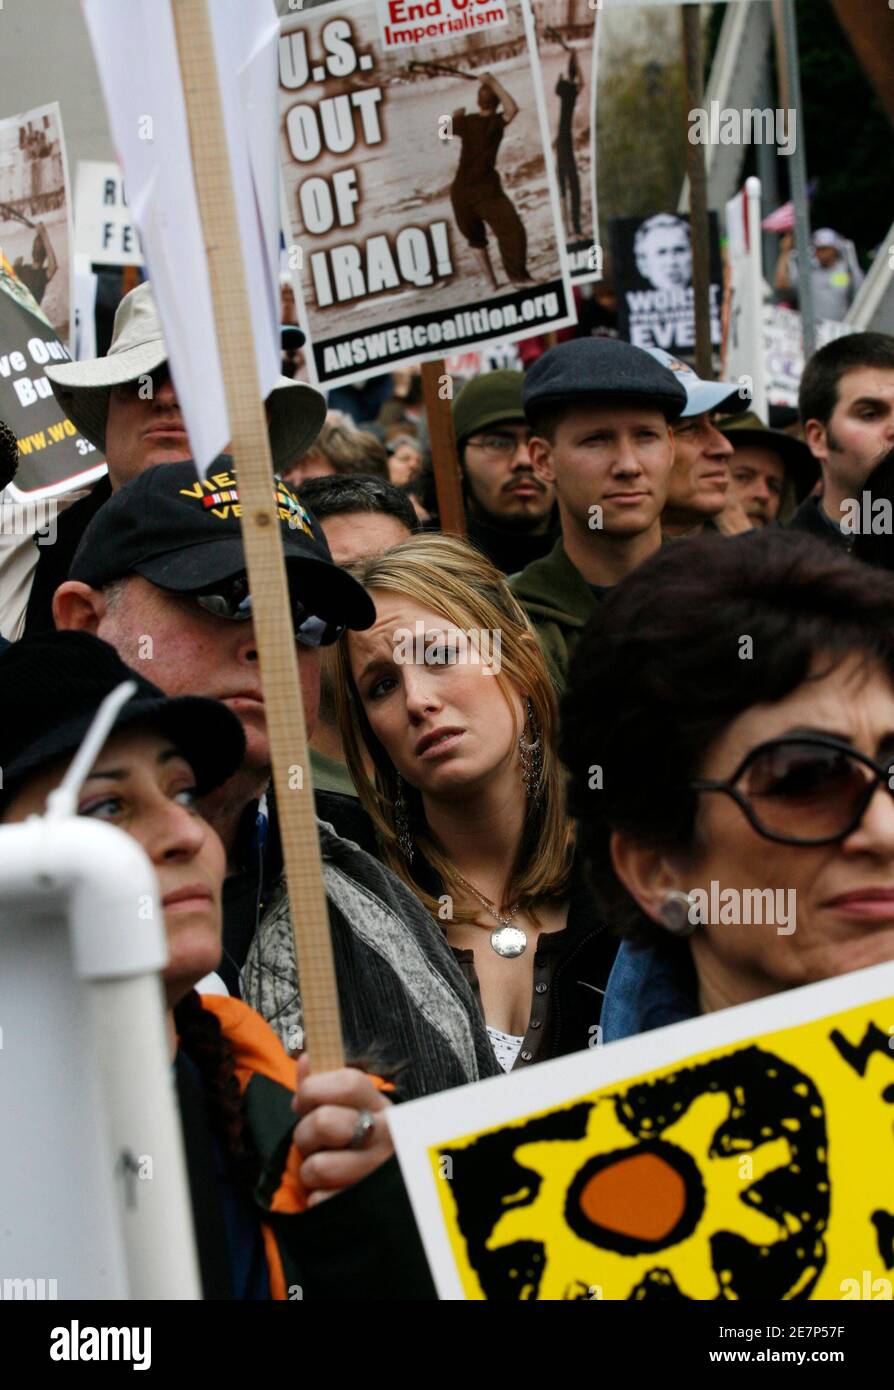 Activists listen to speeches as thousands of protesters prepare to march in Los Angeles January 27, 2007. The march was one of several held around the United States, with protesters demanding that the government bring home U.S. troops in Iraq.  REUTERS/Gus Ruelas (UNITED STATES) Stock Photo